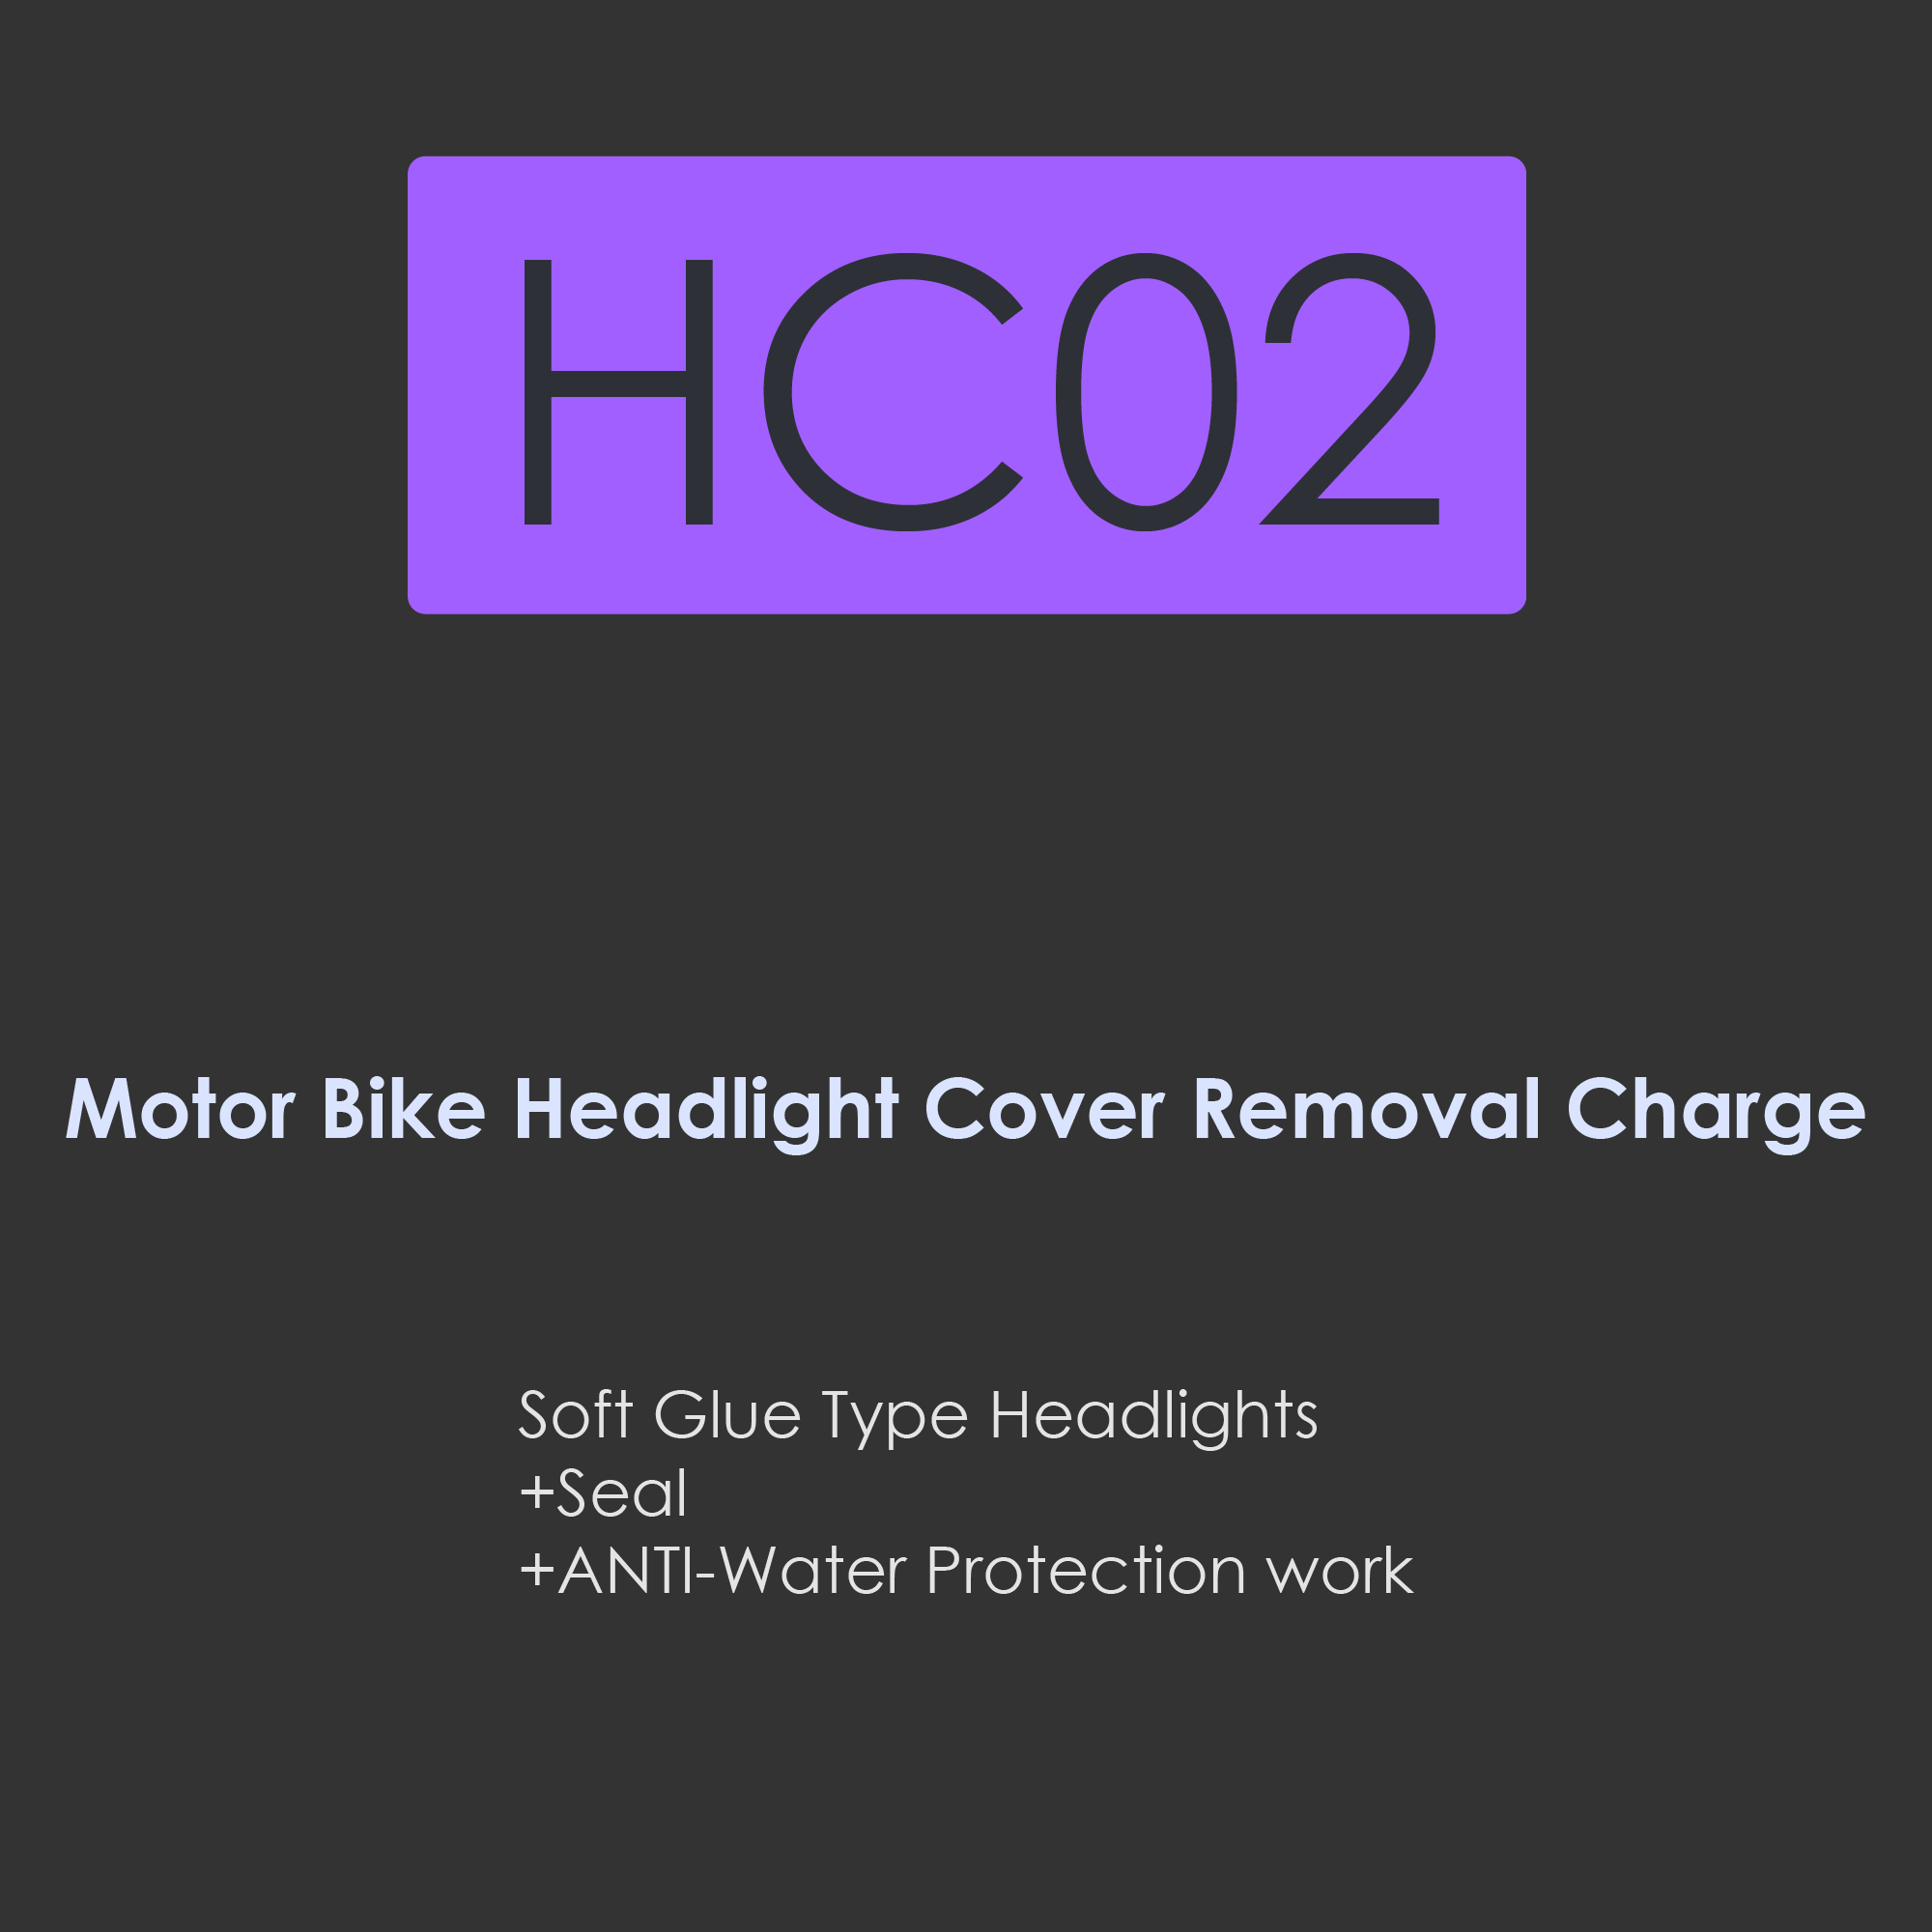 HC02-Motor bike headlight removal charge for soft glue type headlights+seal+anti-water protection work